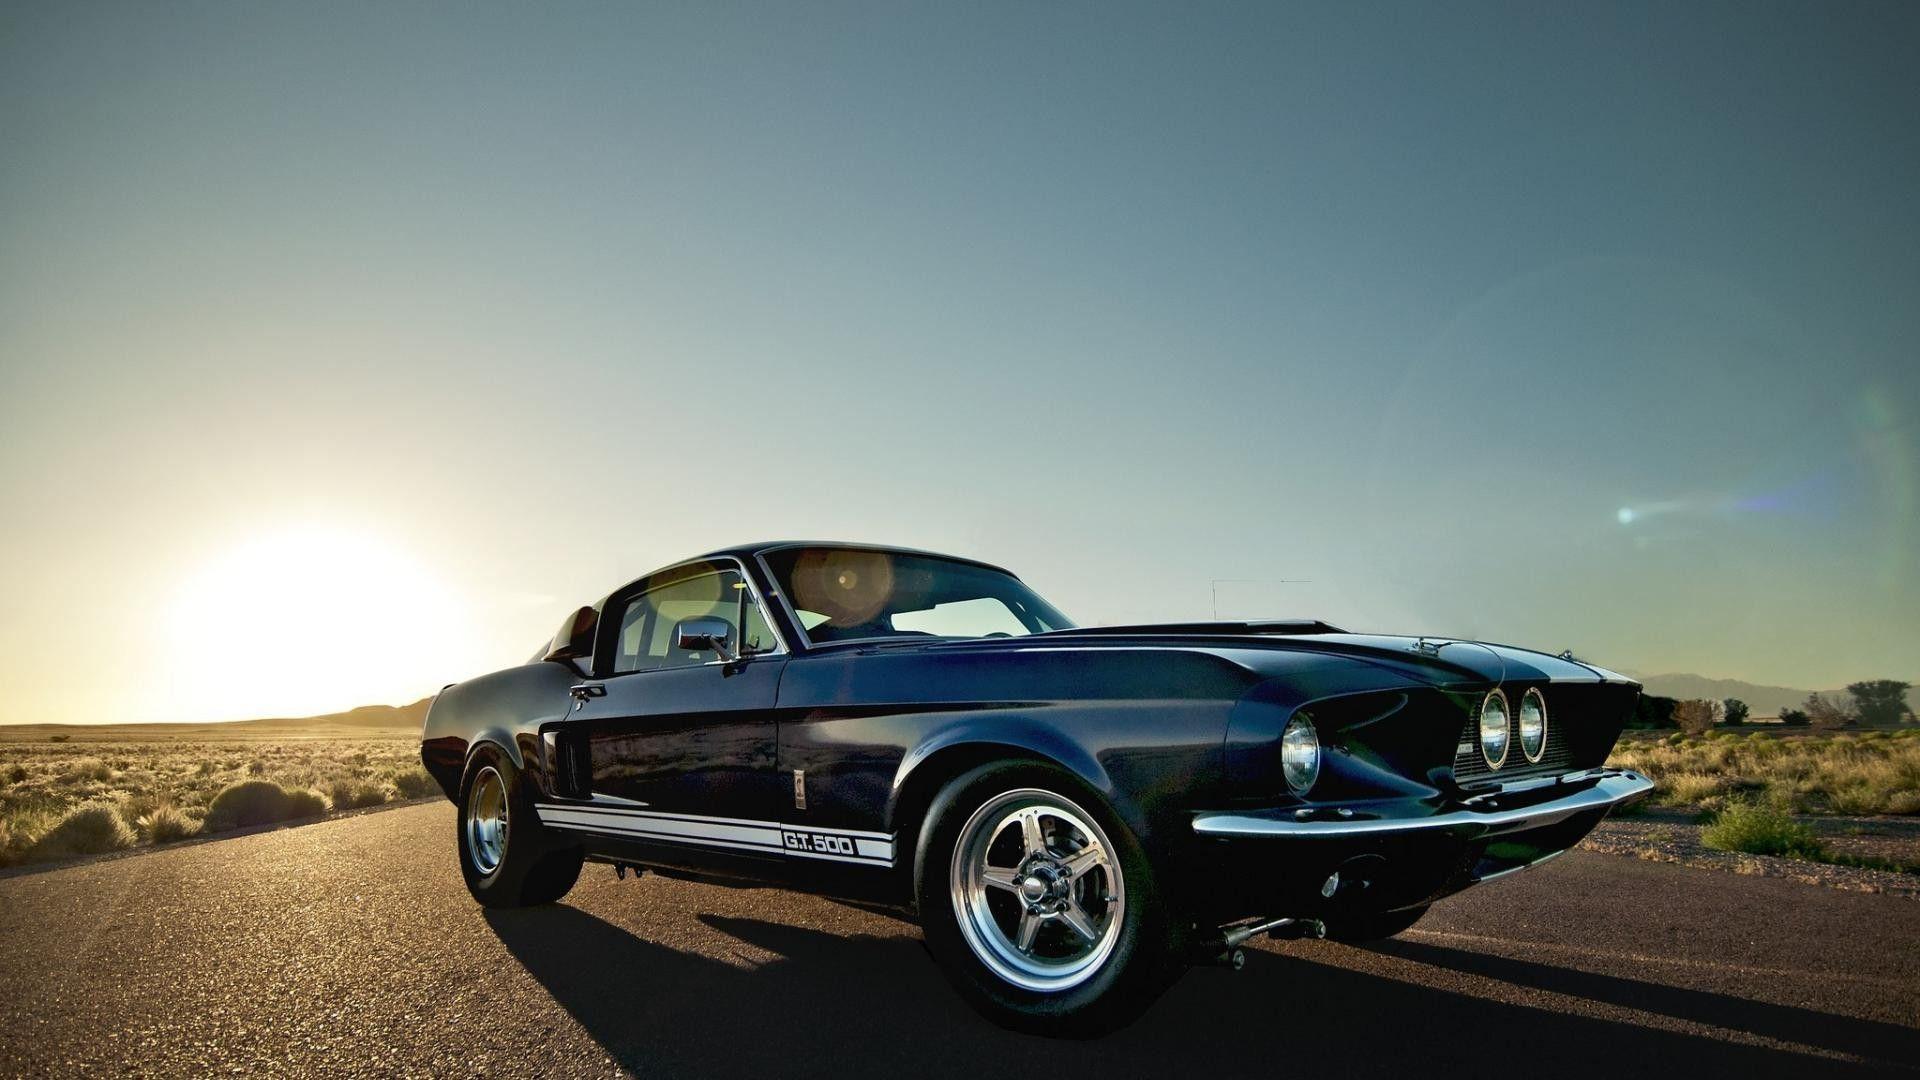 HD Mustang Wallpaper For Free Download